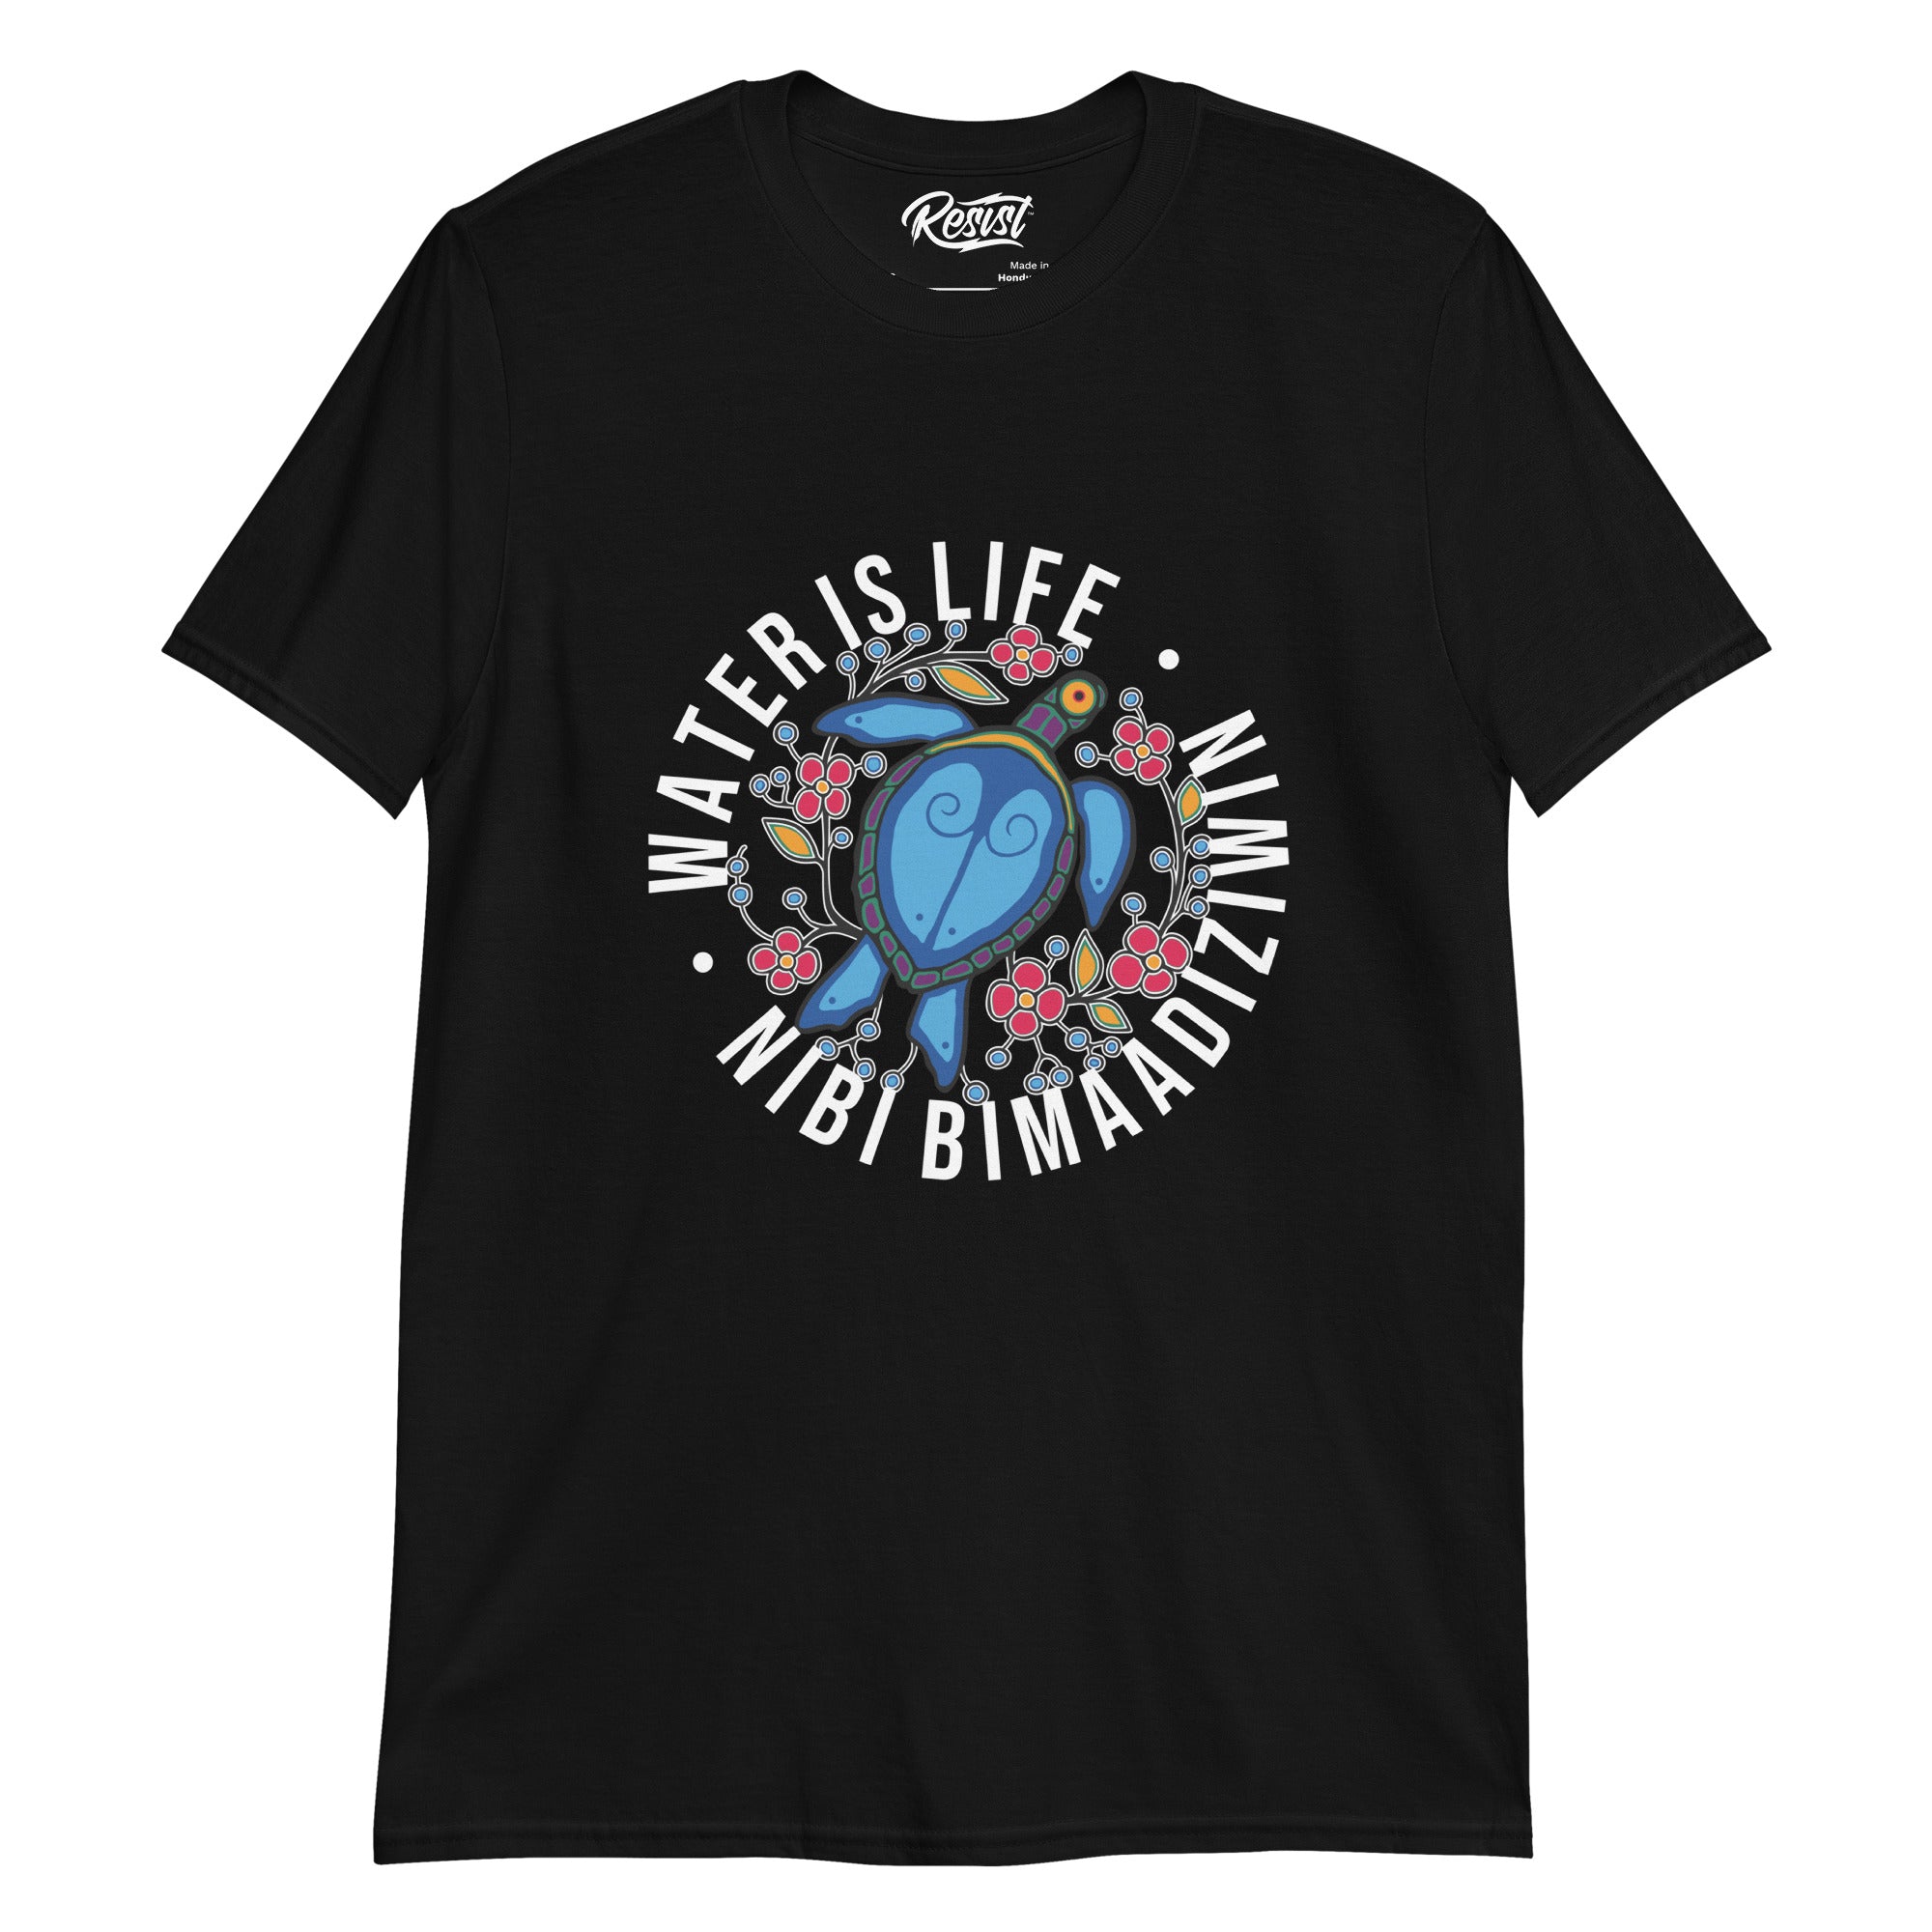 Water is life T-shirt